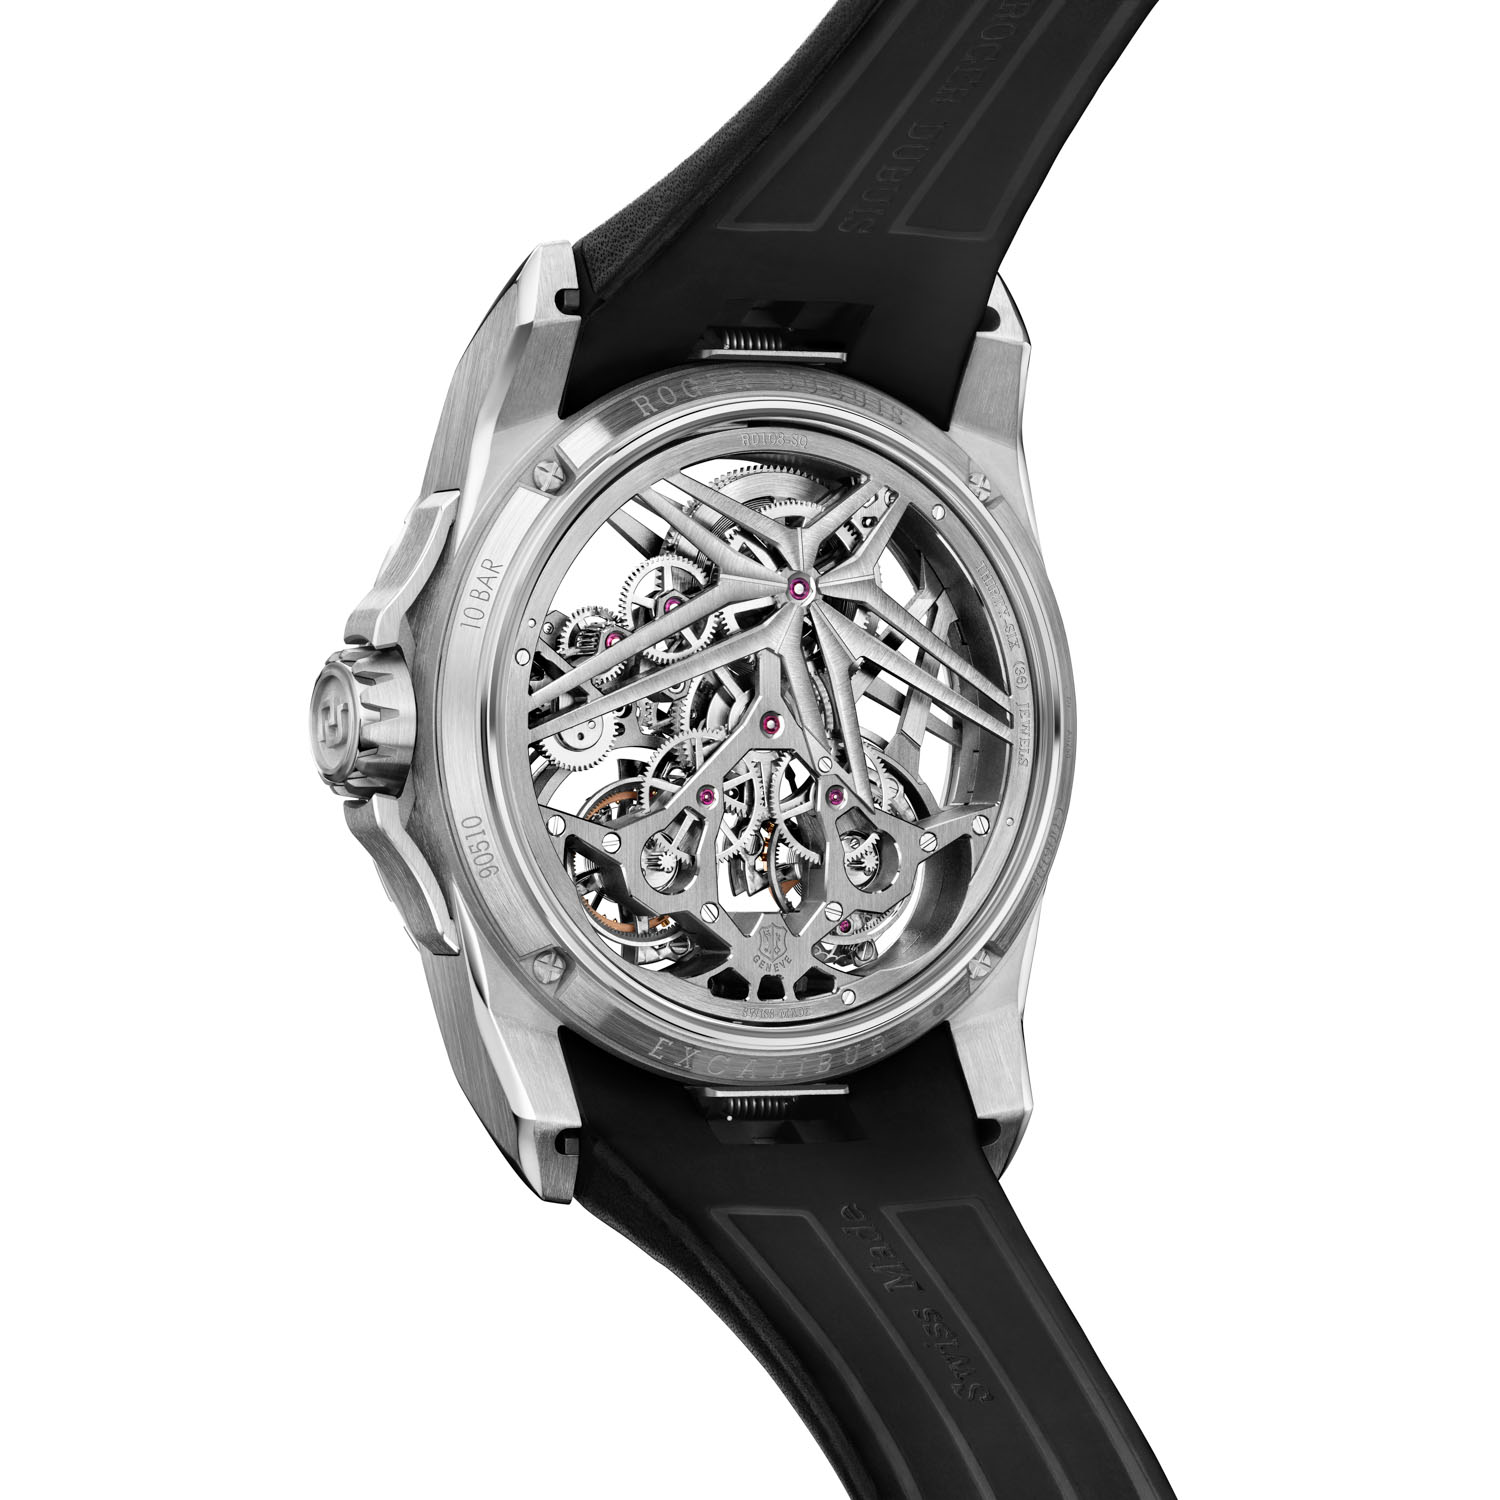 The 2021 Excalibur Double Flying Tourbillon ref. RDDBEX0819 in a 45mm white gold case (Limited edition of 8 pieces)